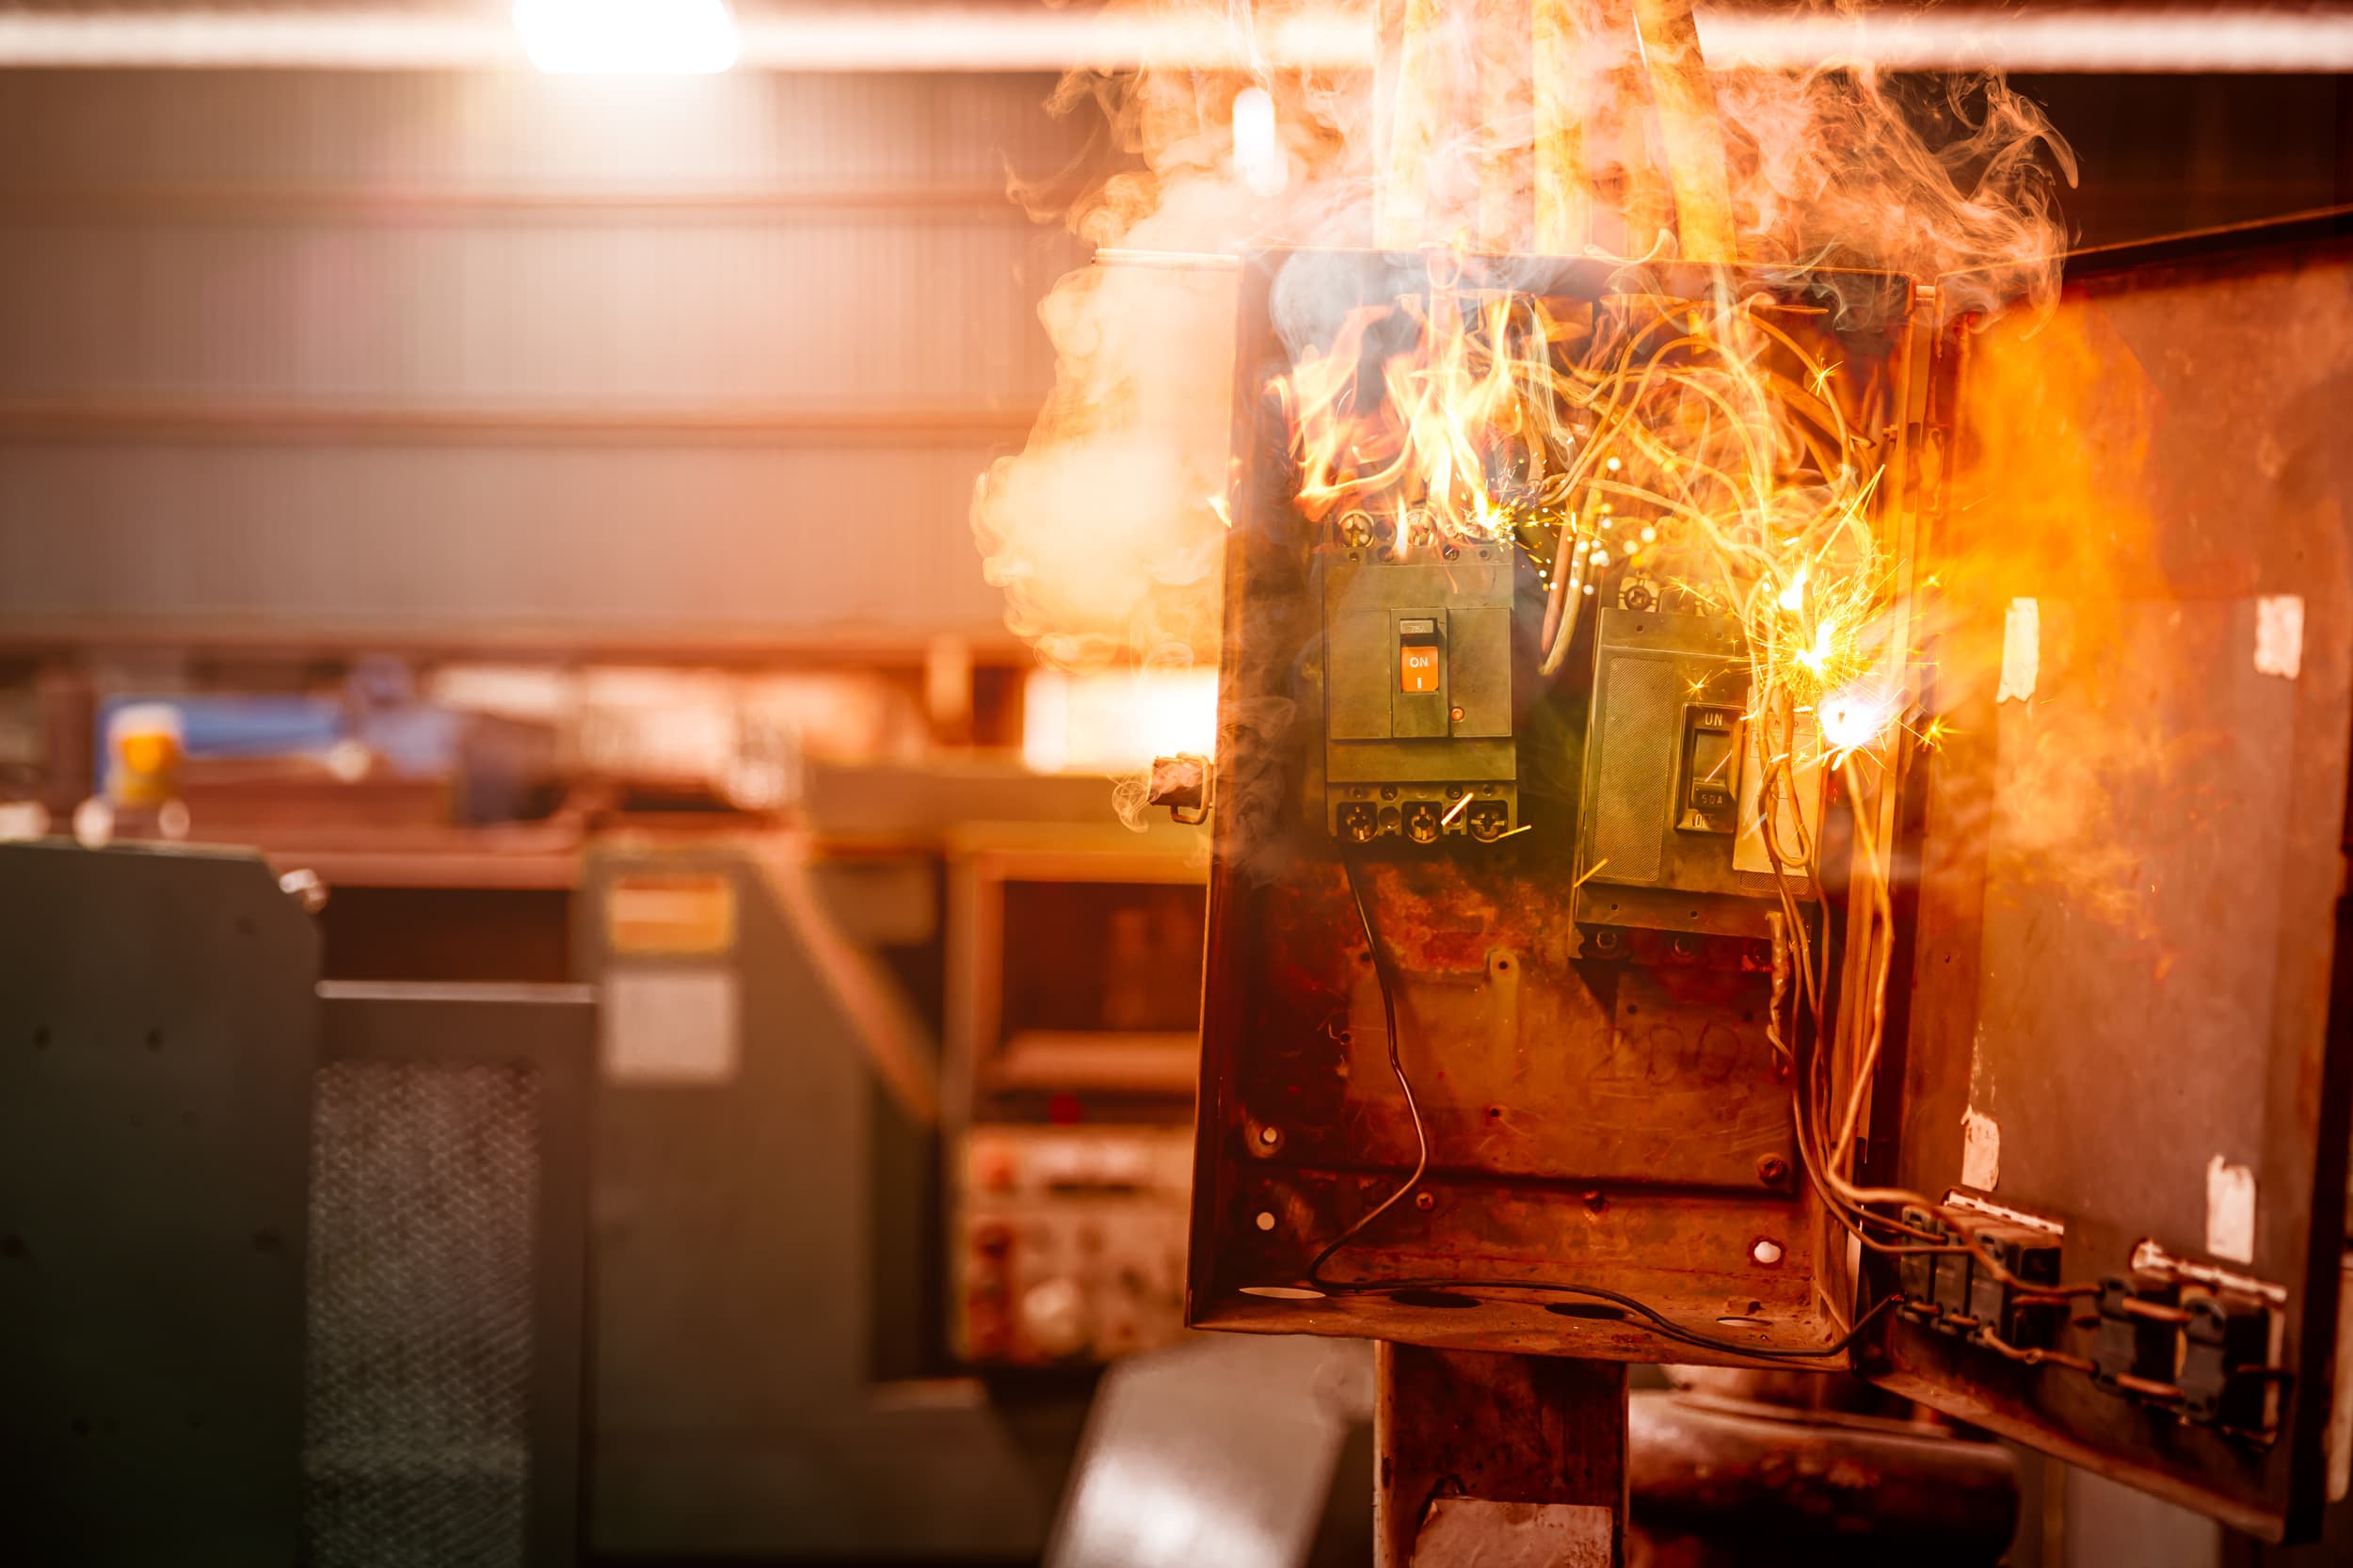 Compliance Training Online Arc Flash Safety course